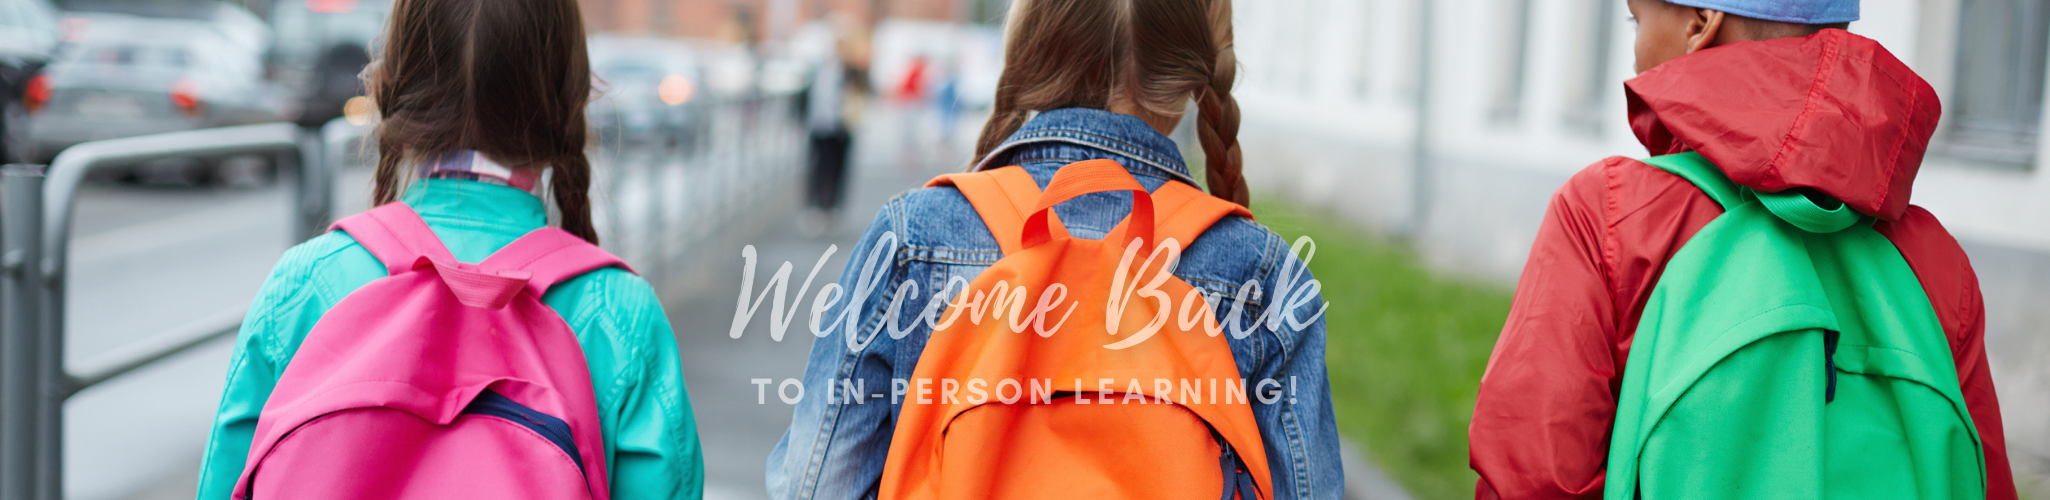 three girls with backpacks with text "Welcome Back to In Person Learning"